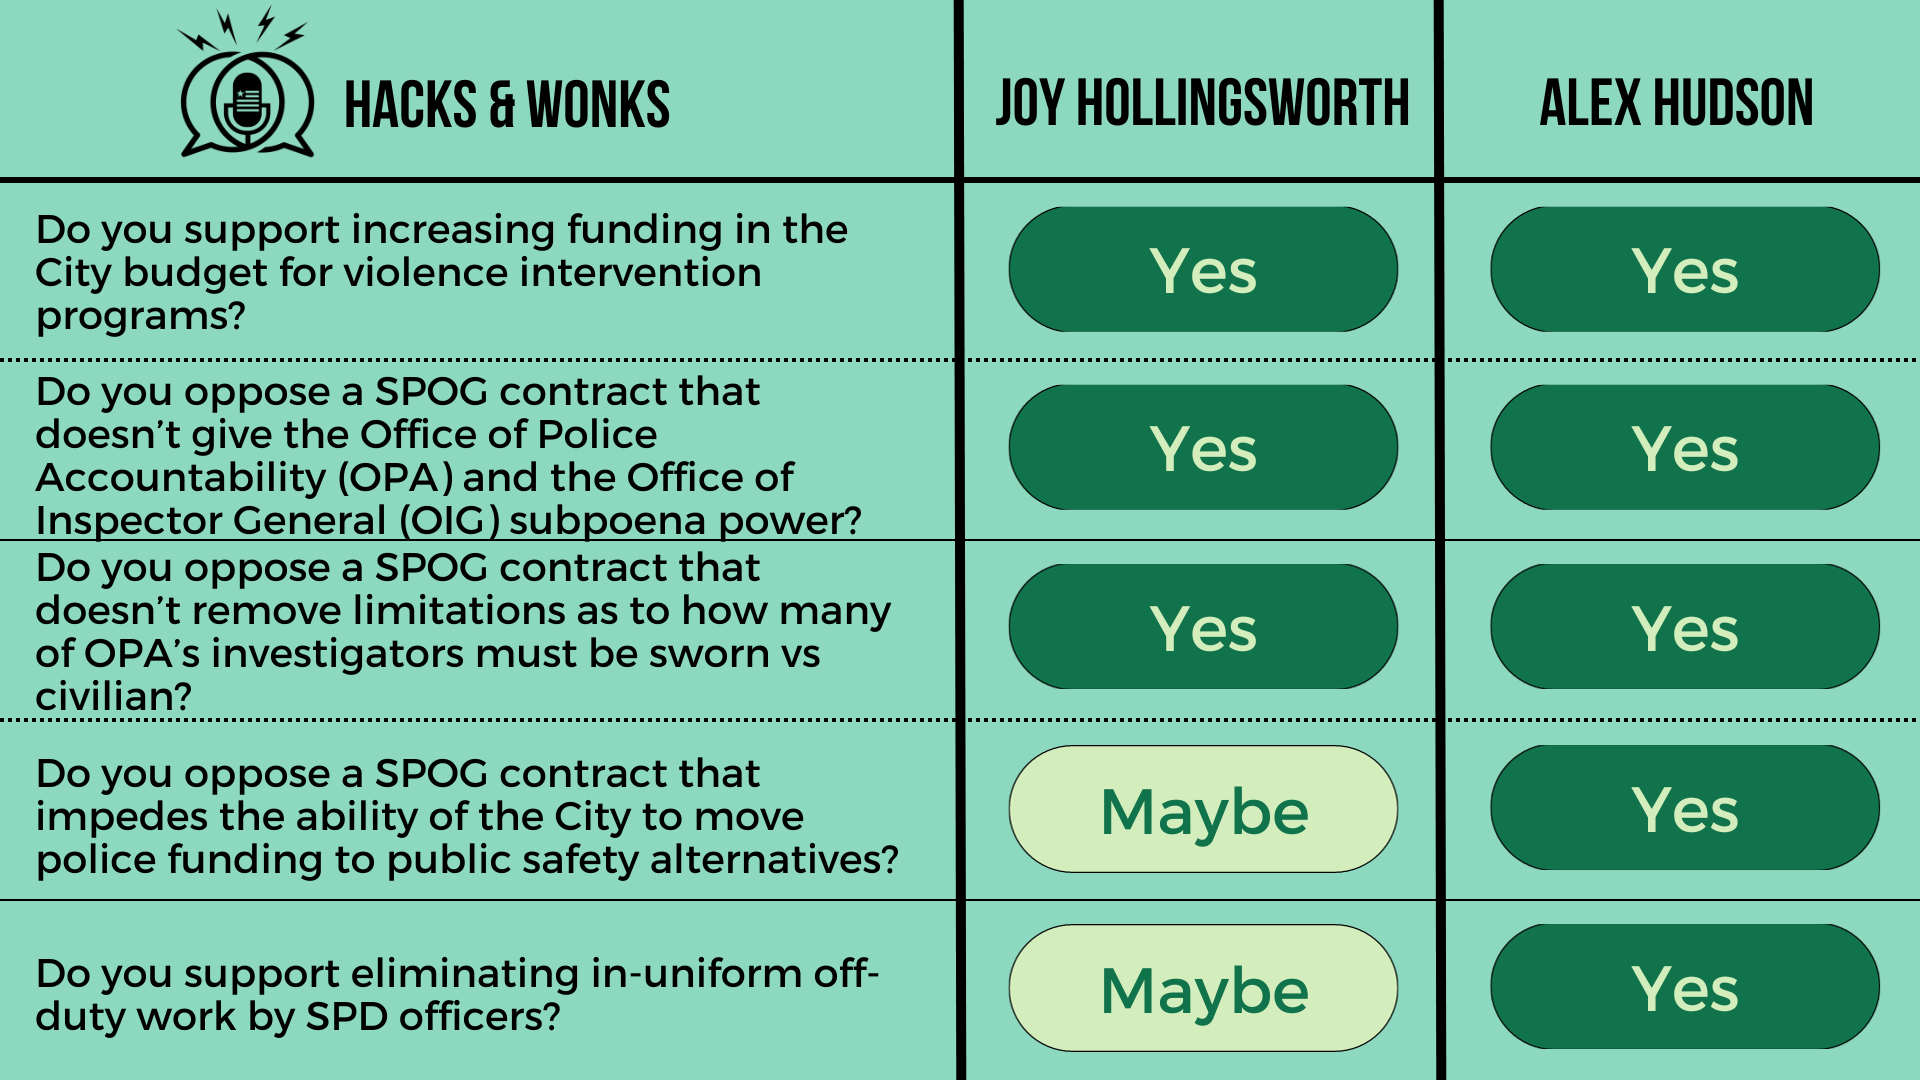 Q: Do you support increasing funding in the City budget for violence intervention programs? Joy Hollingsworth: Yes, Alex Hudson: Yes  Q: Do you oppose a SPOG contract that doesn’t give the Office of Police Accountability (OPA) and the Office of Inspe